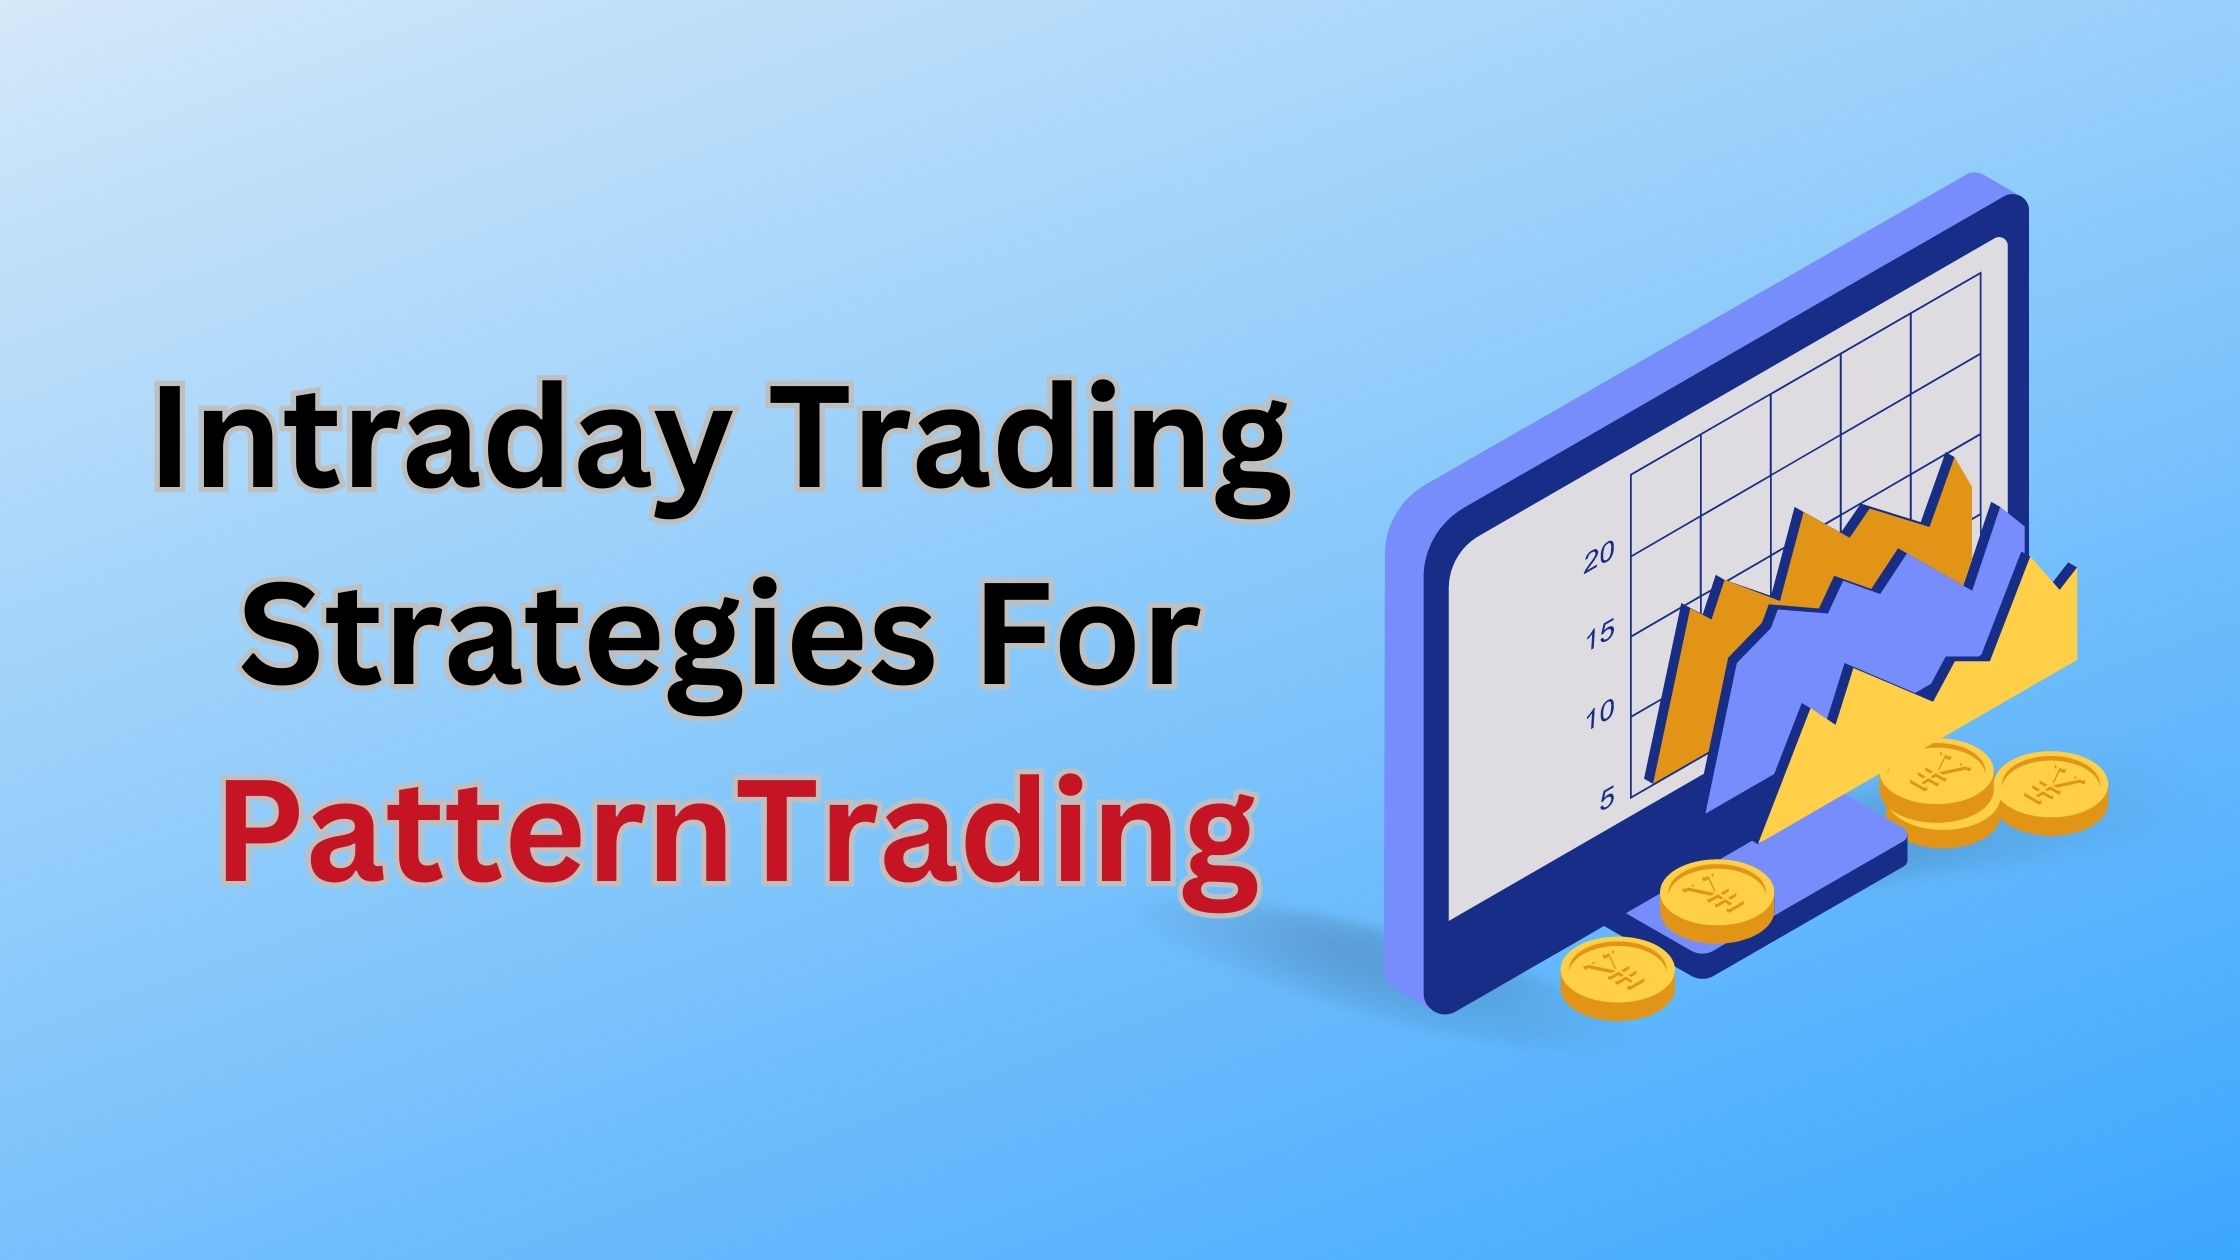 Intraday Trading Strategies: Pattern Trading